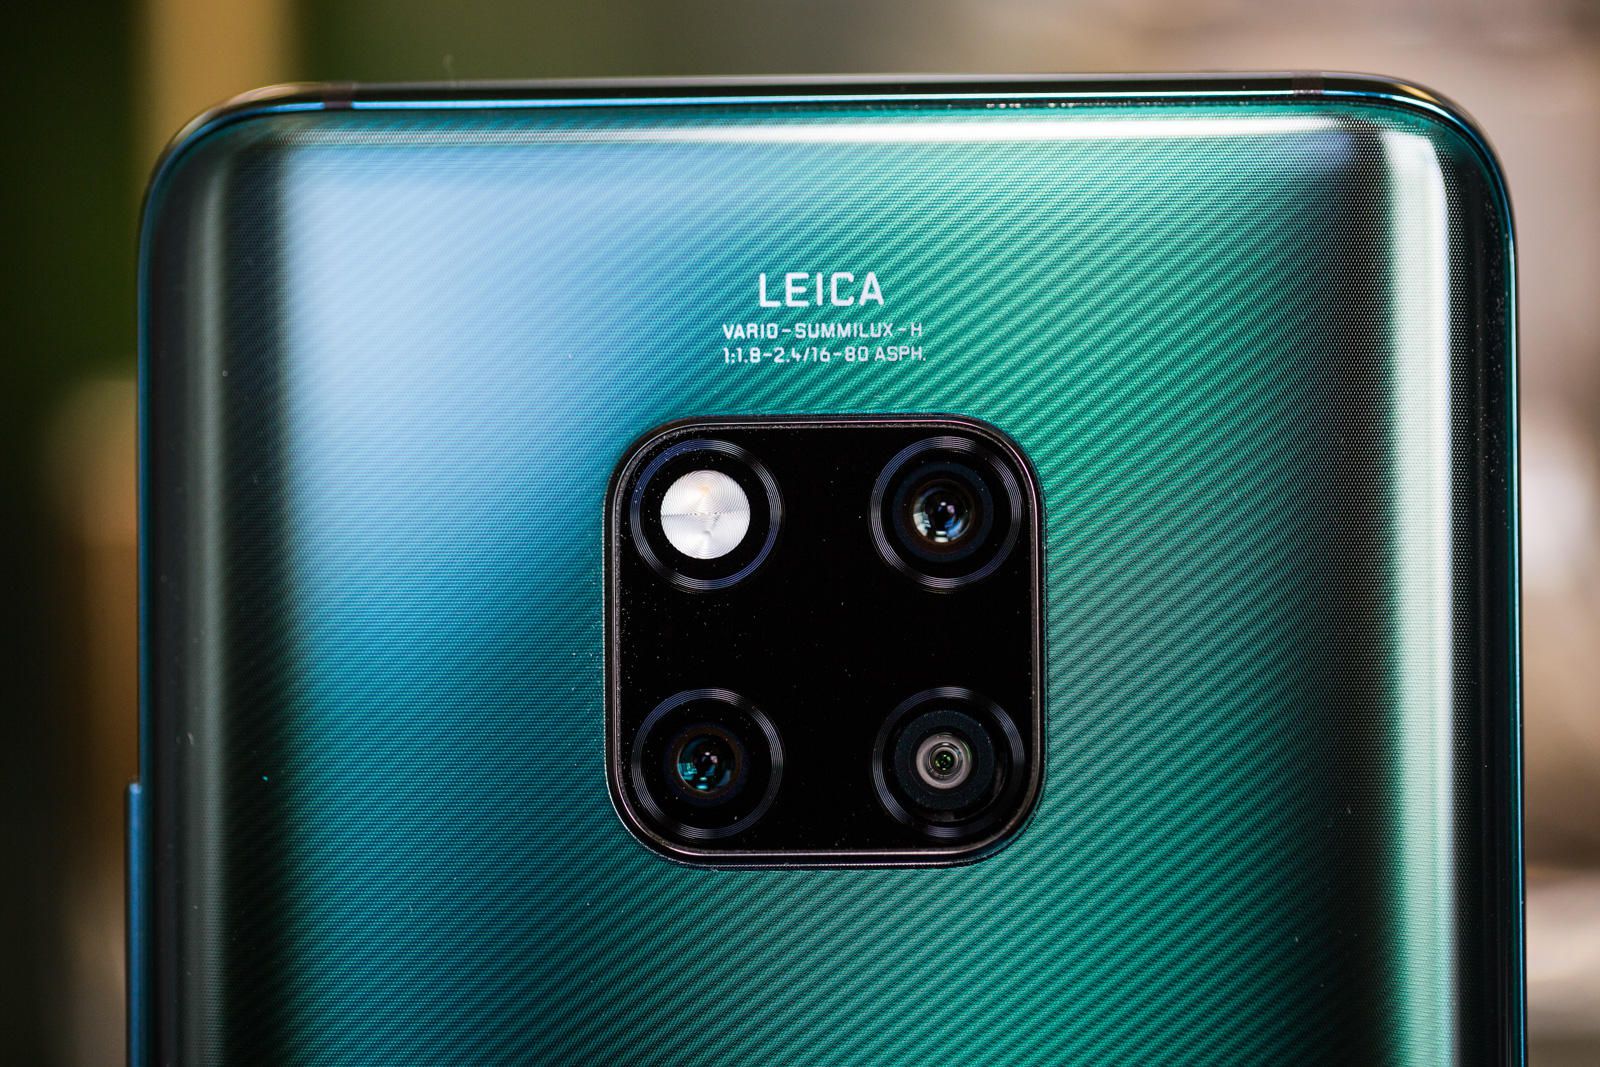 Huawei Mate 20 Pro wins the “GSMA Best Smartphone Award” at MWC 2019